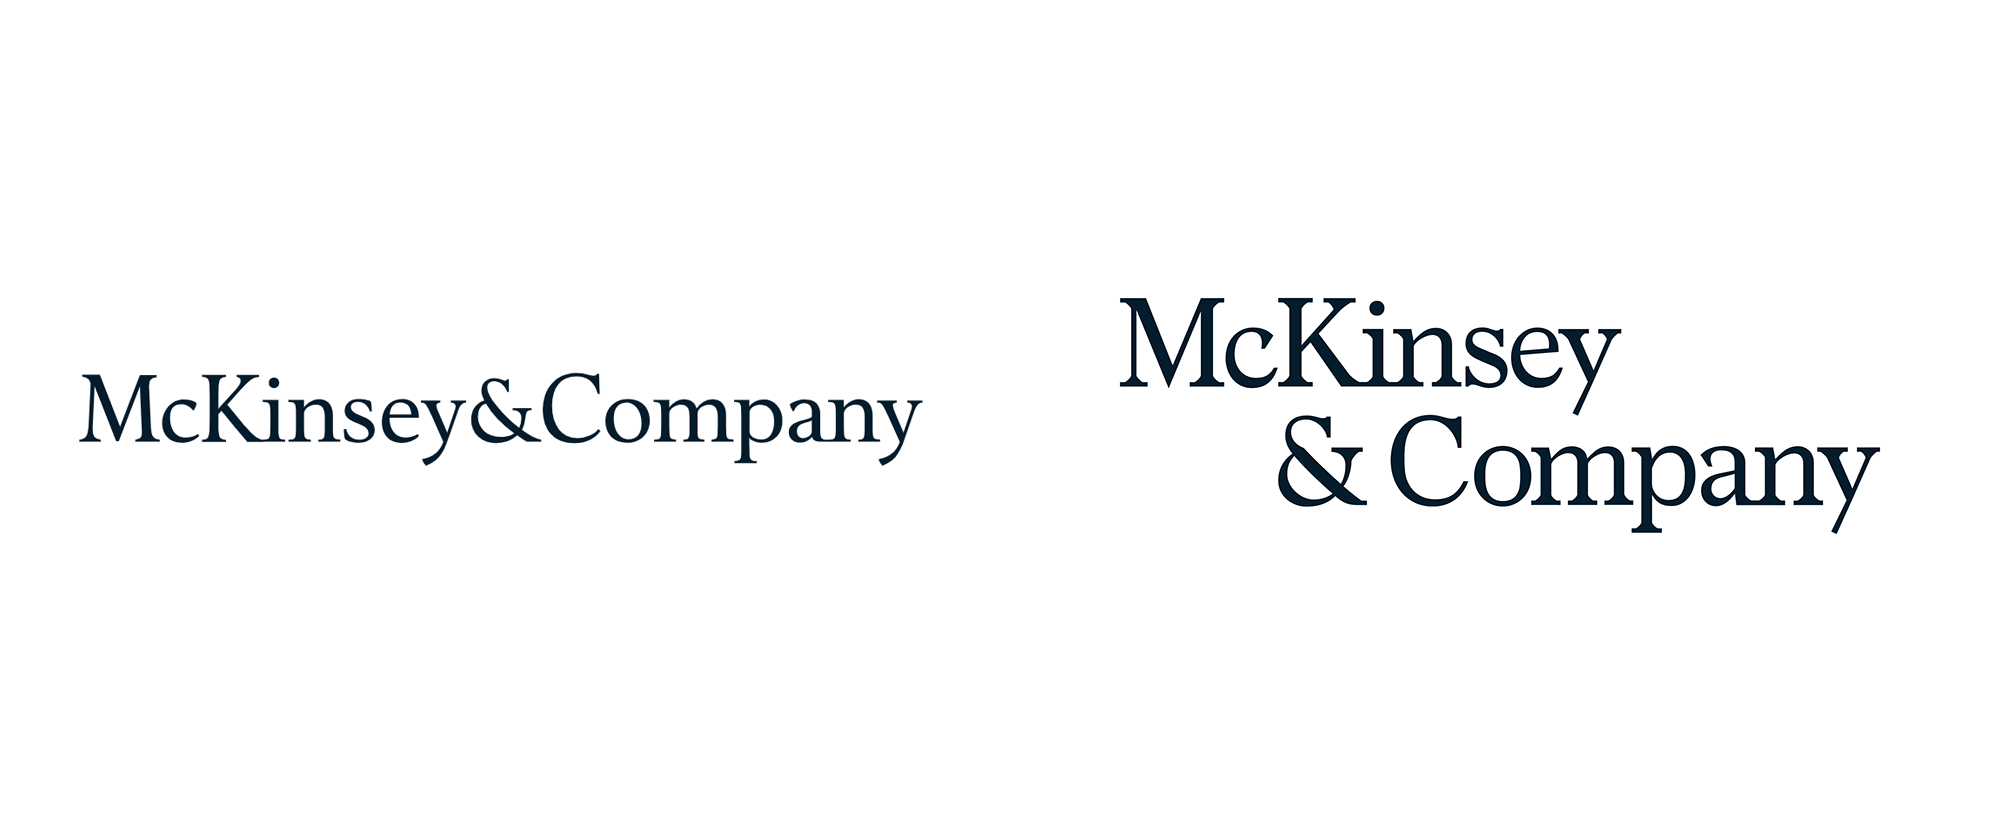 New Logo and Identity for McKinsey by Wolff Olins